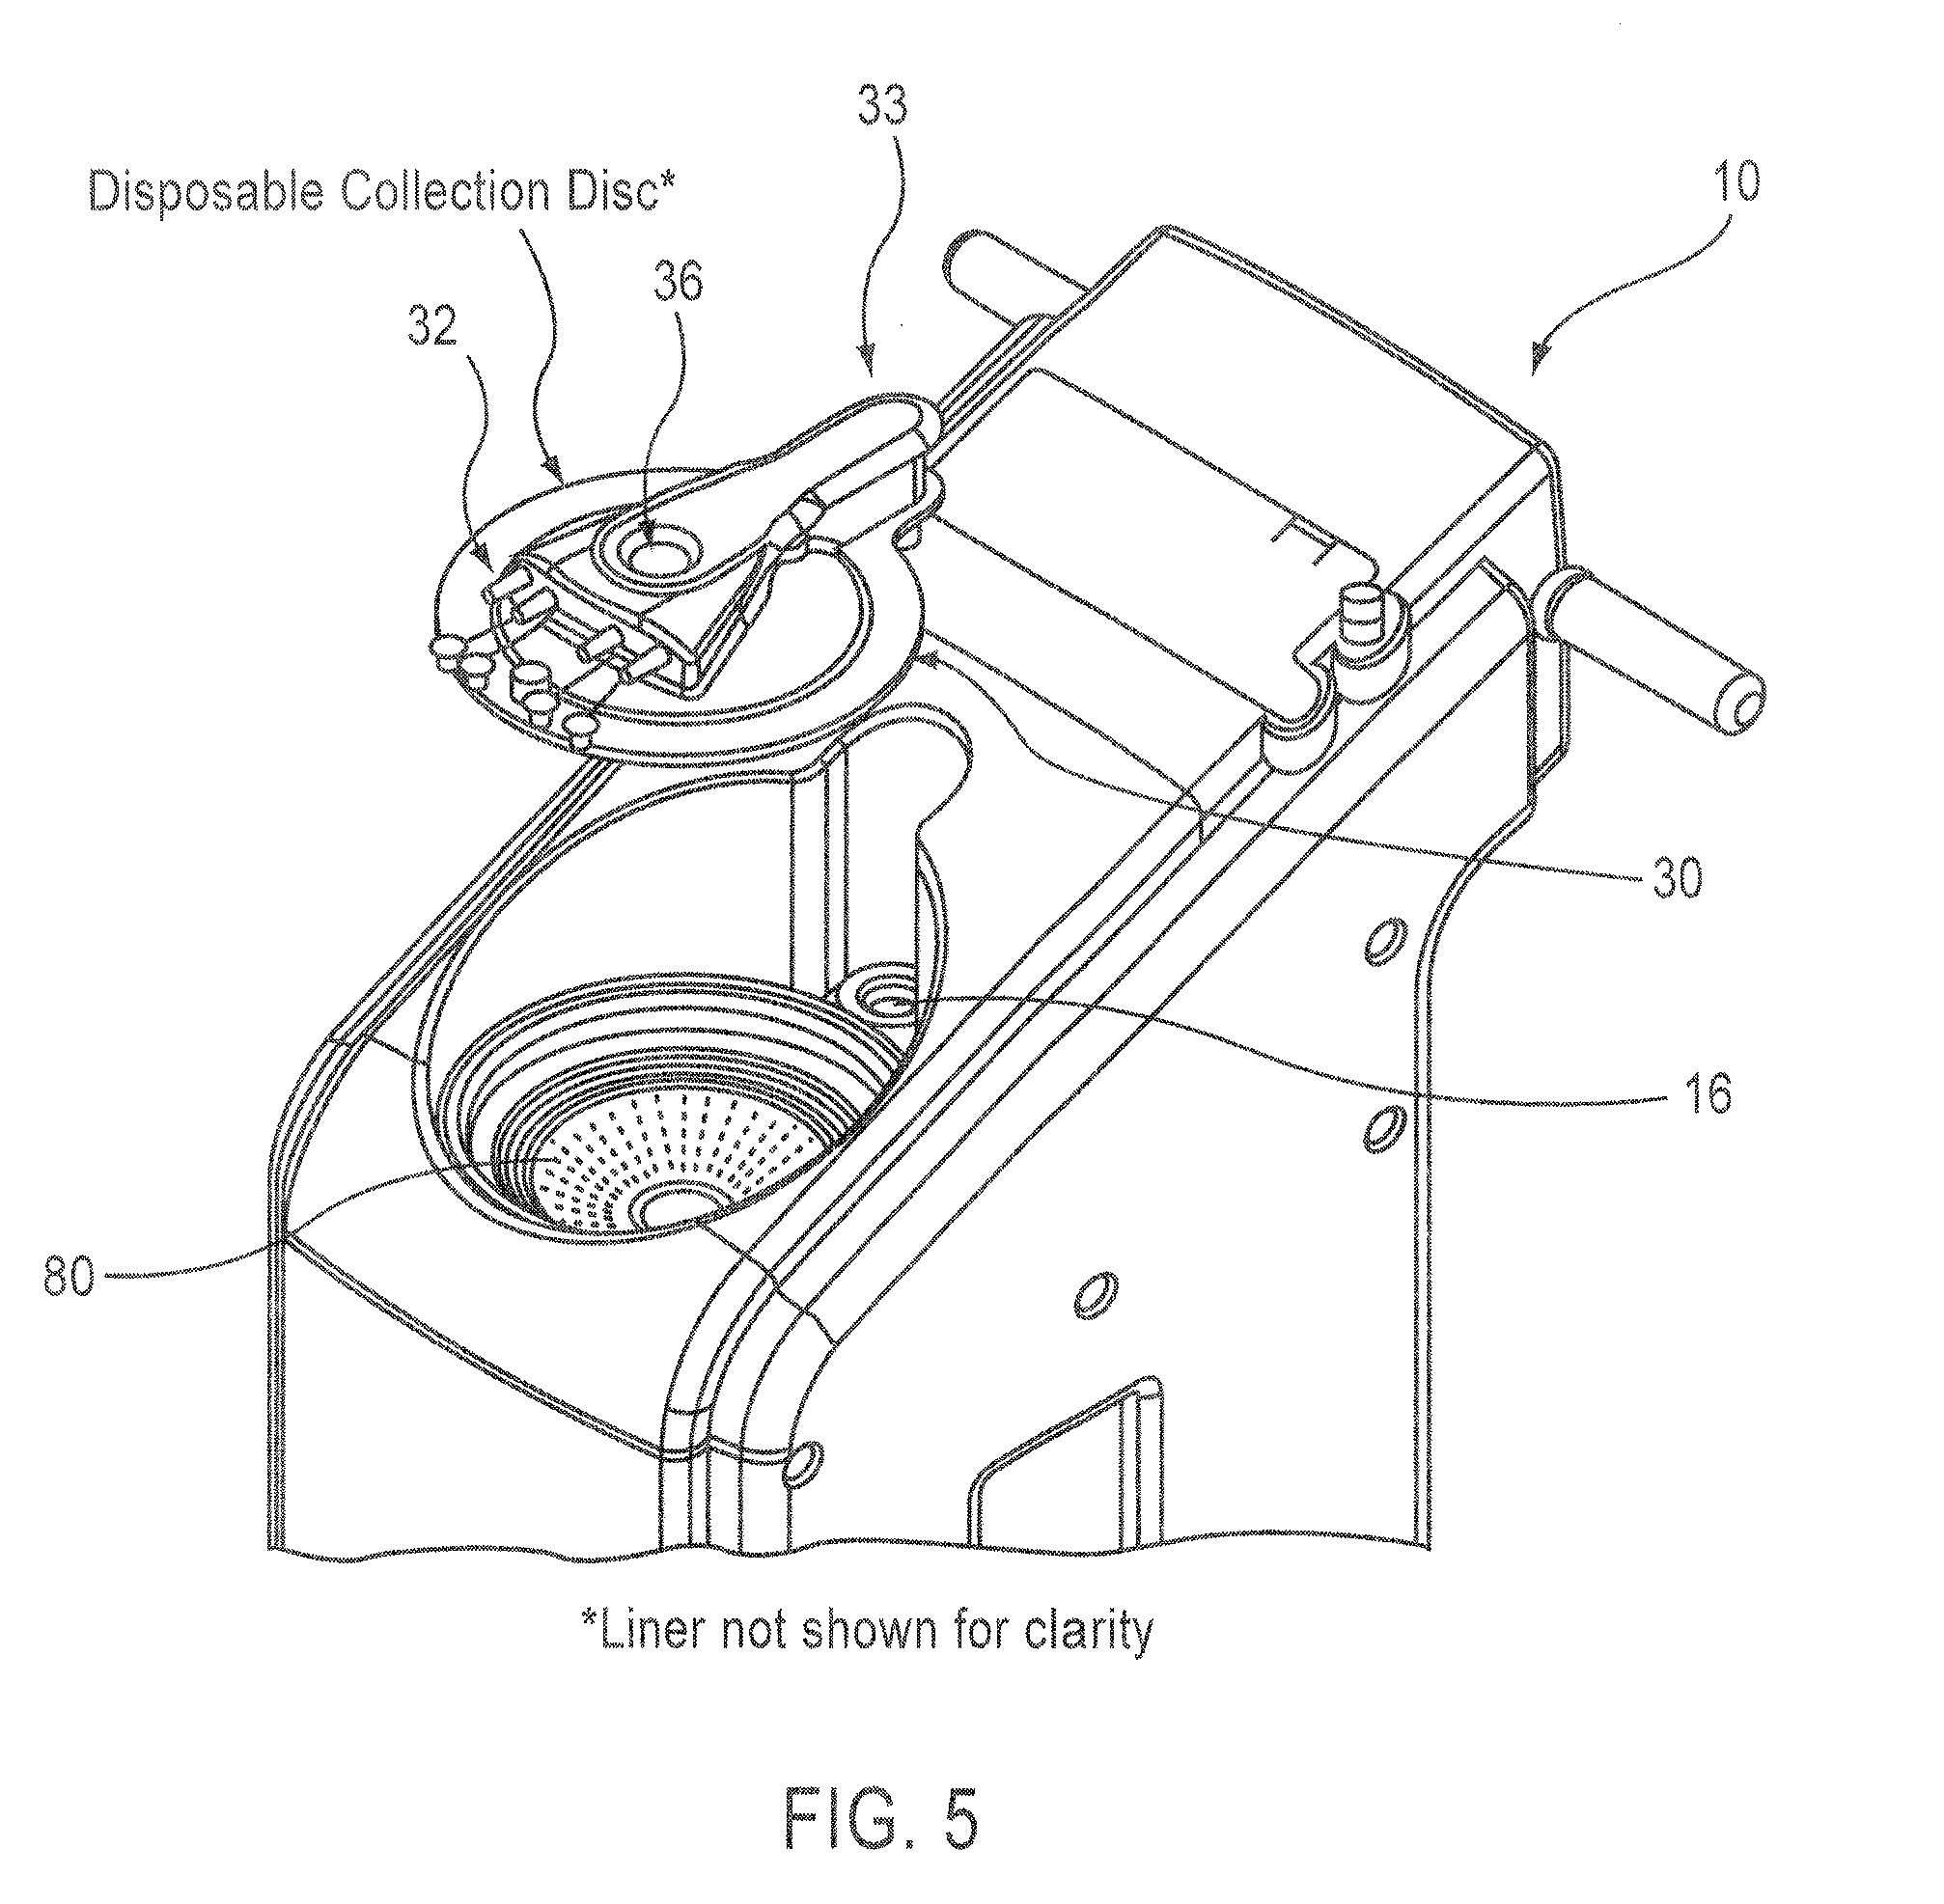 Fluid collection and disposal system and related methods